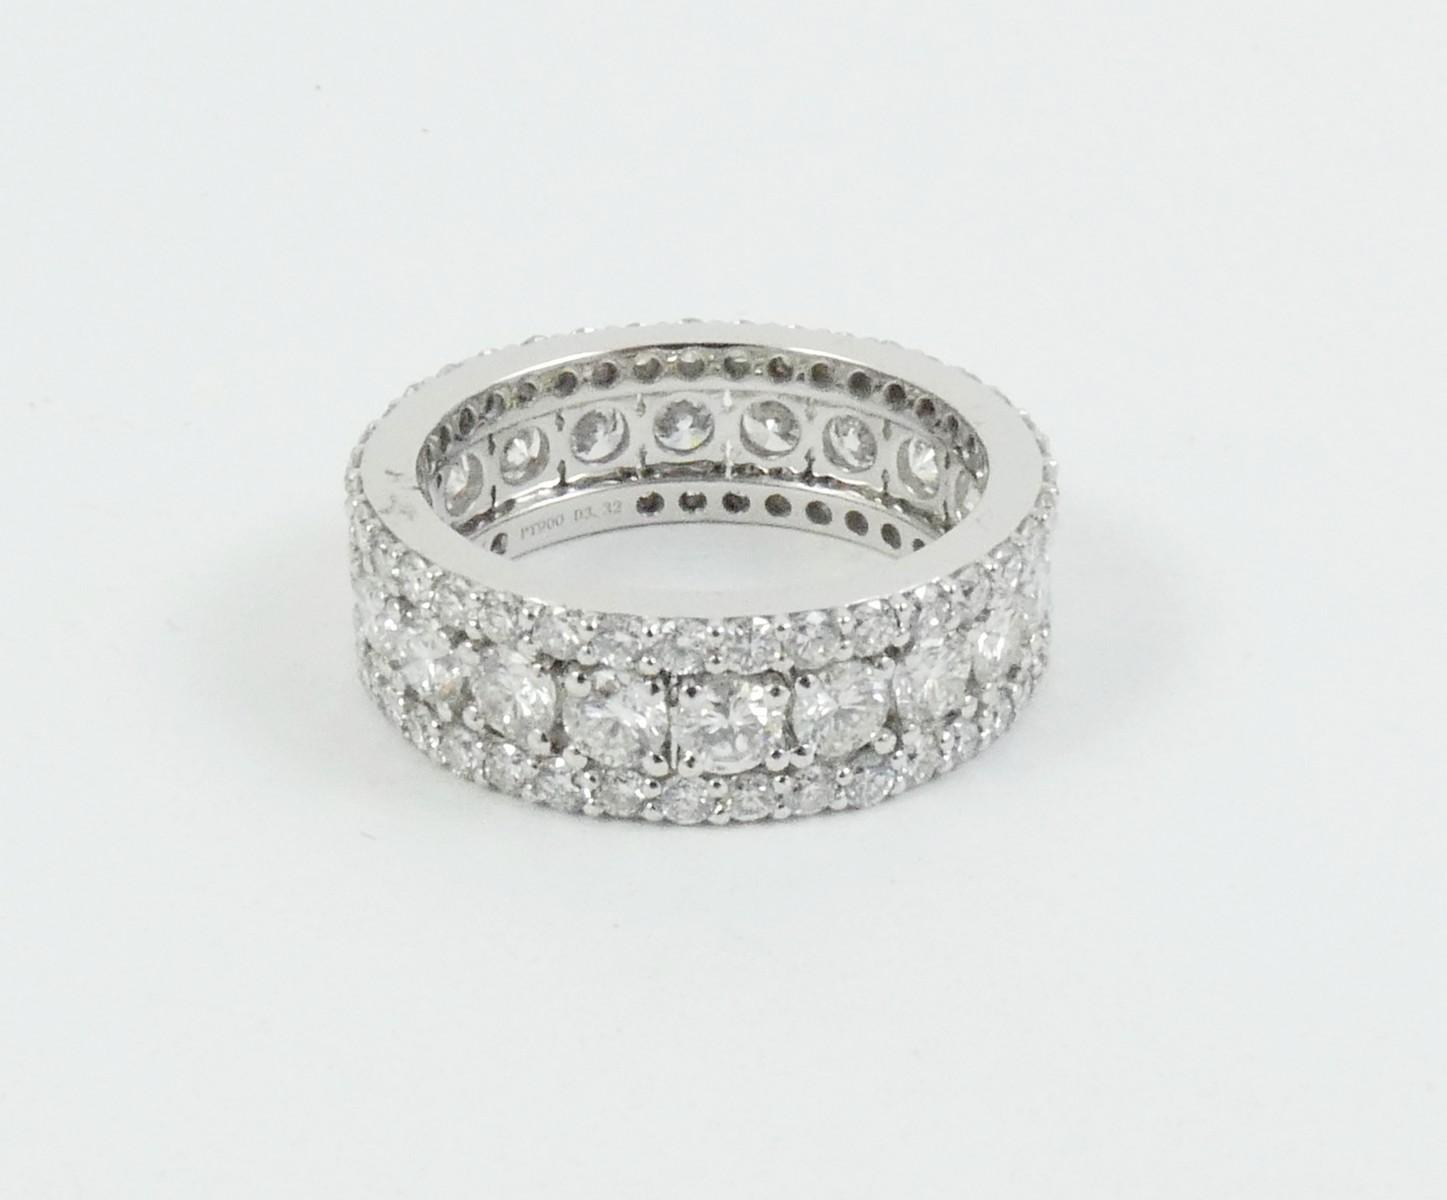 VERY VALUABLE ETERNITY RING